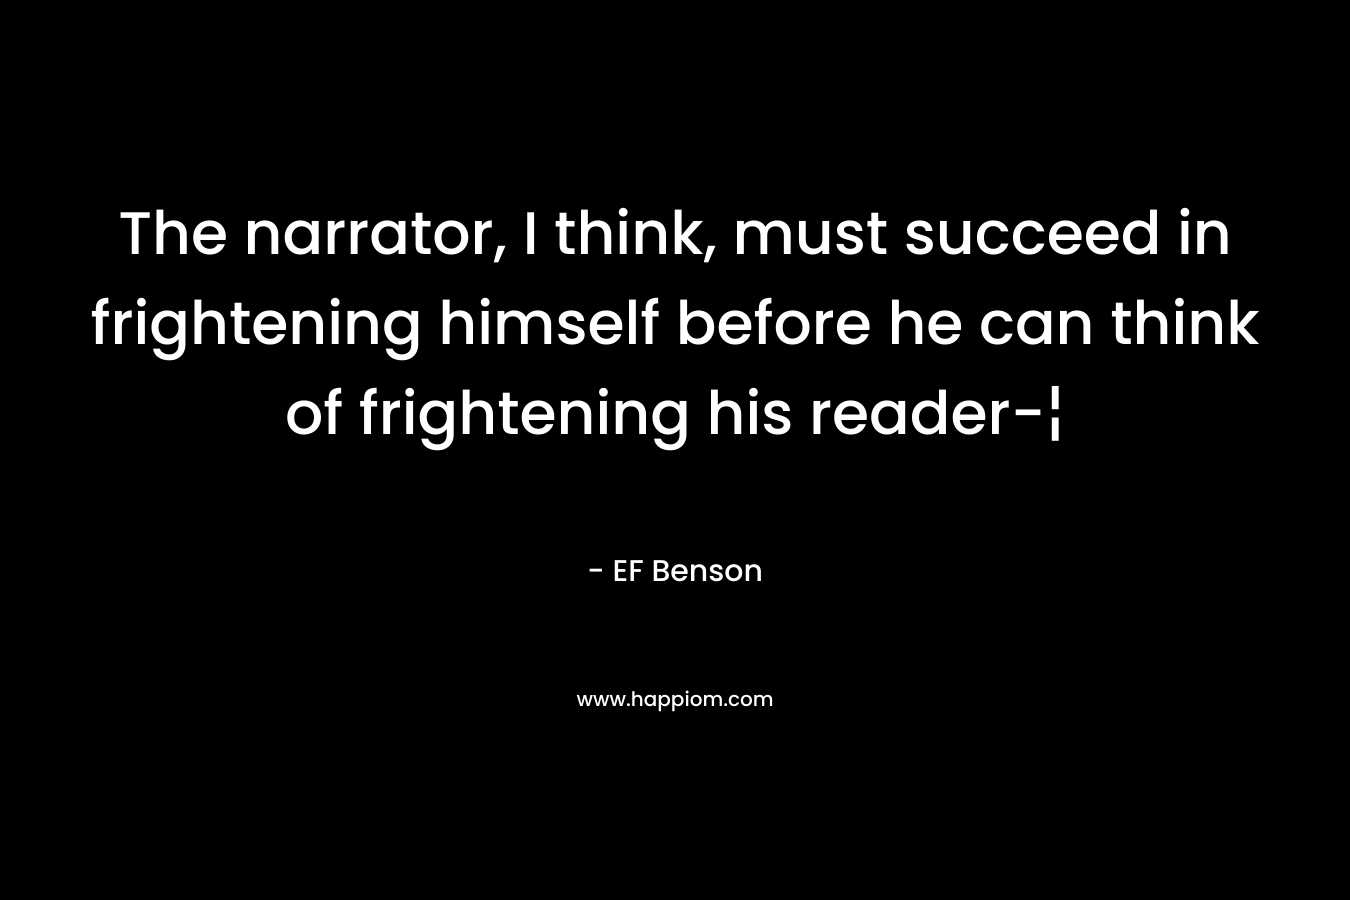 The narrator, I think, must succeed in frightening himself before he can think of frightening his reader-¦